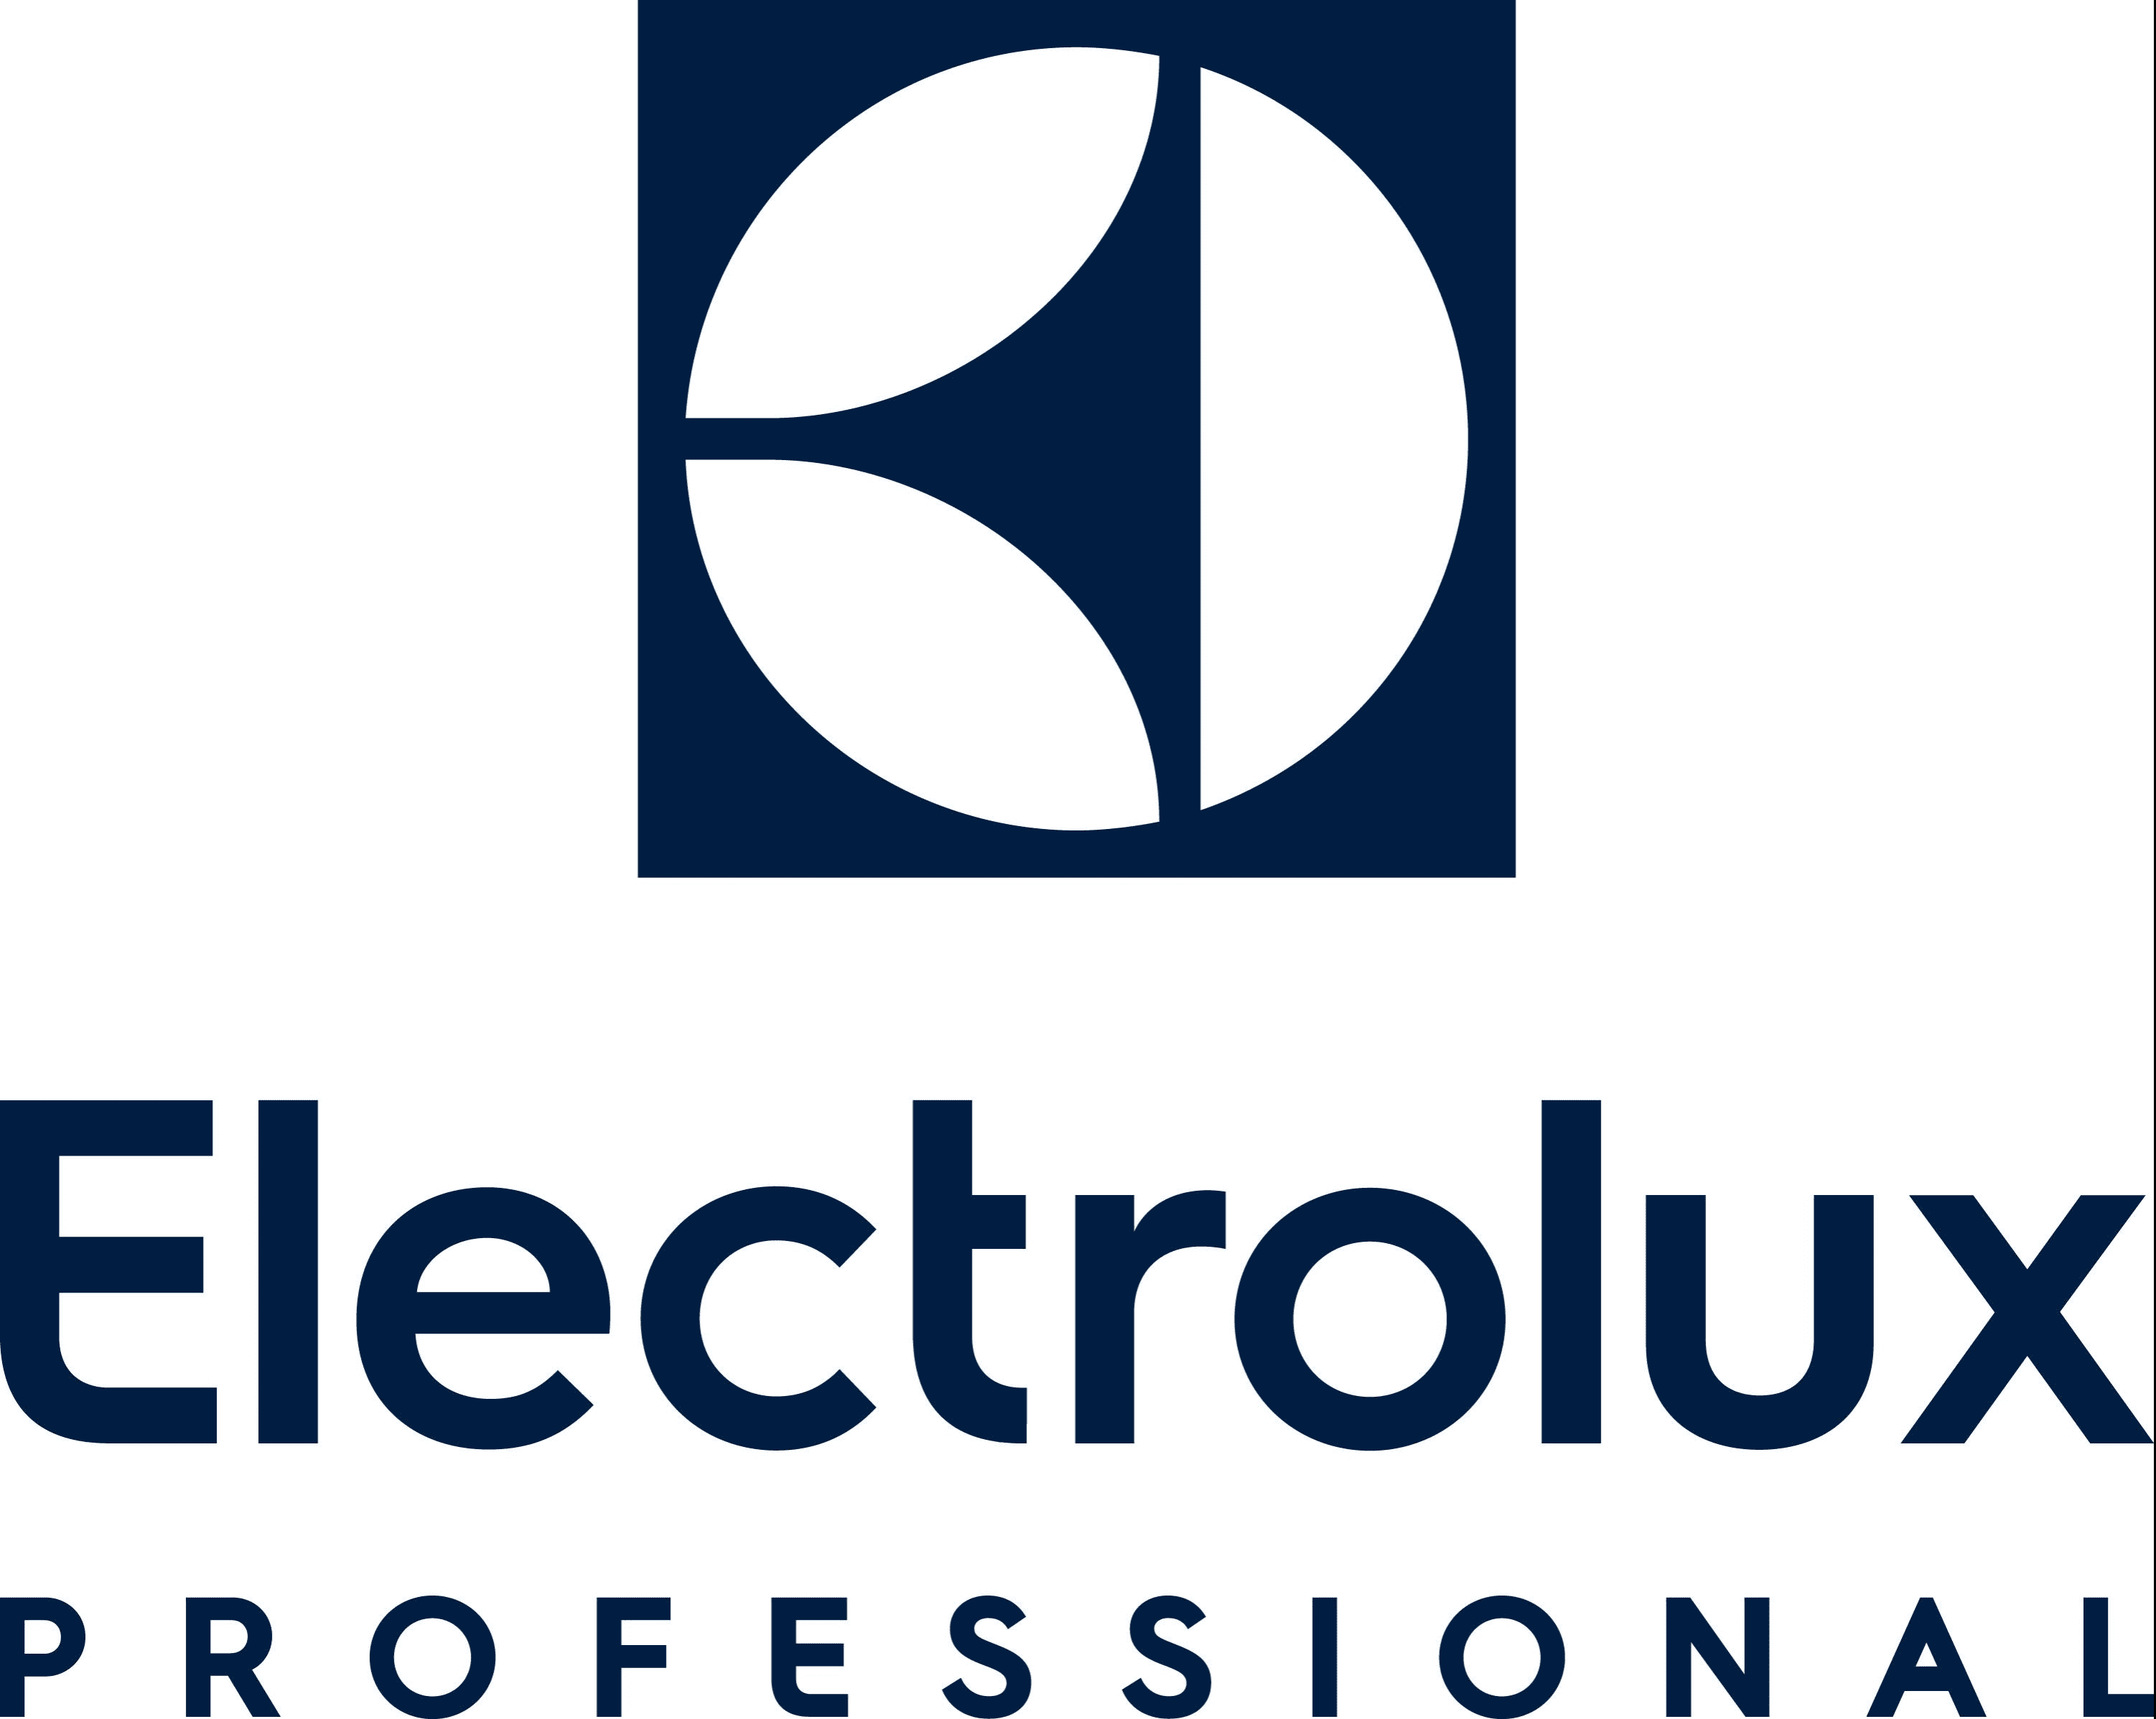 Electrolux Professional AG